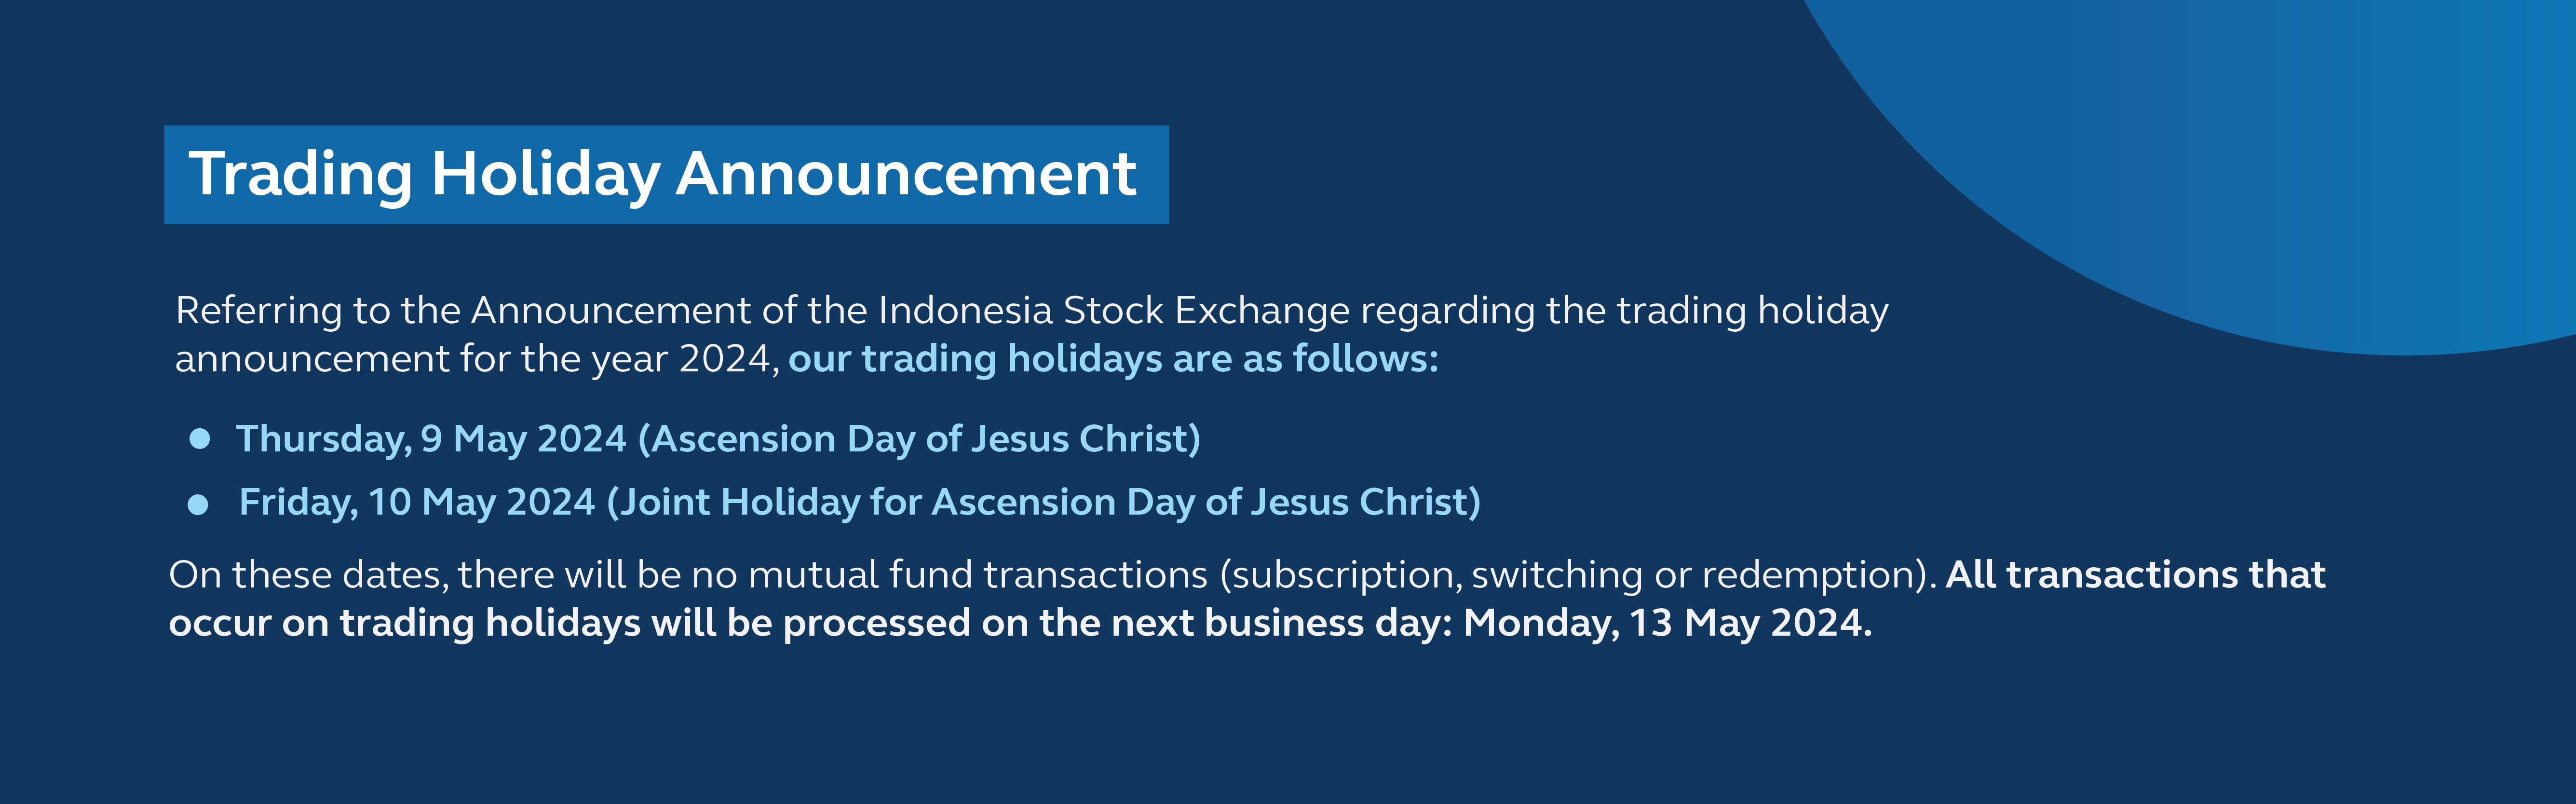 Trading Holiday Announcement - Ascension Day of Jesus Christ